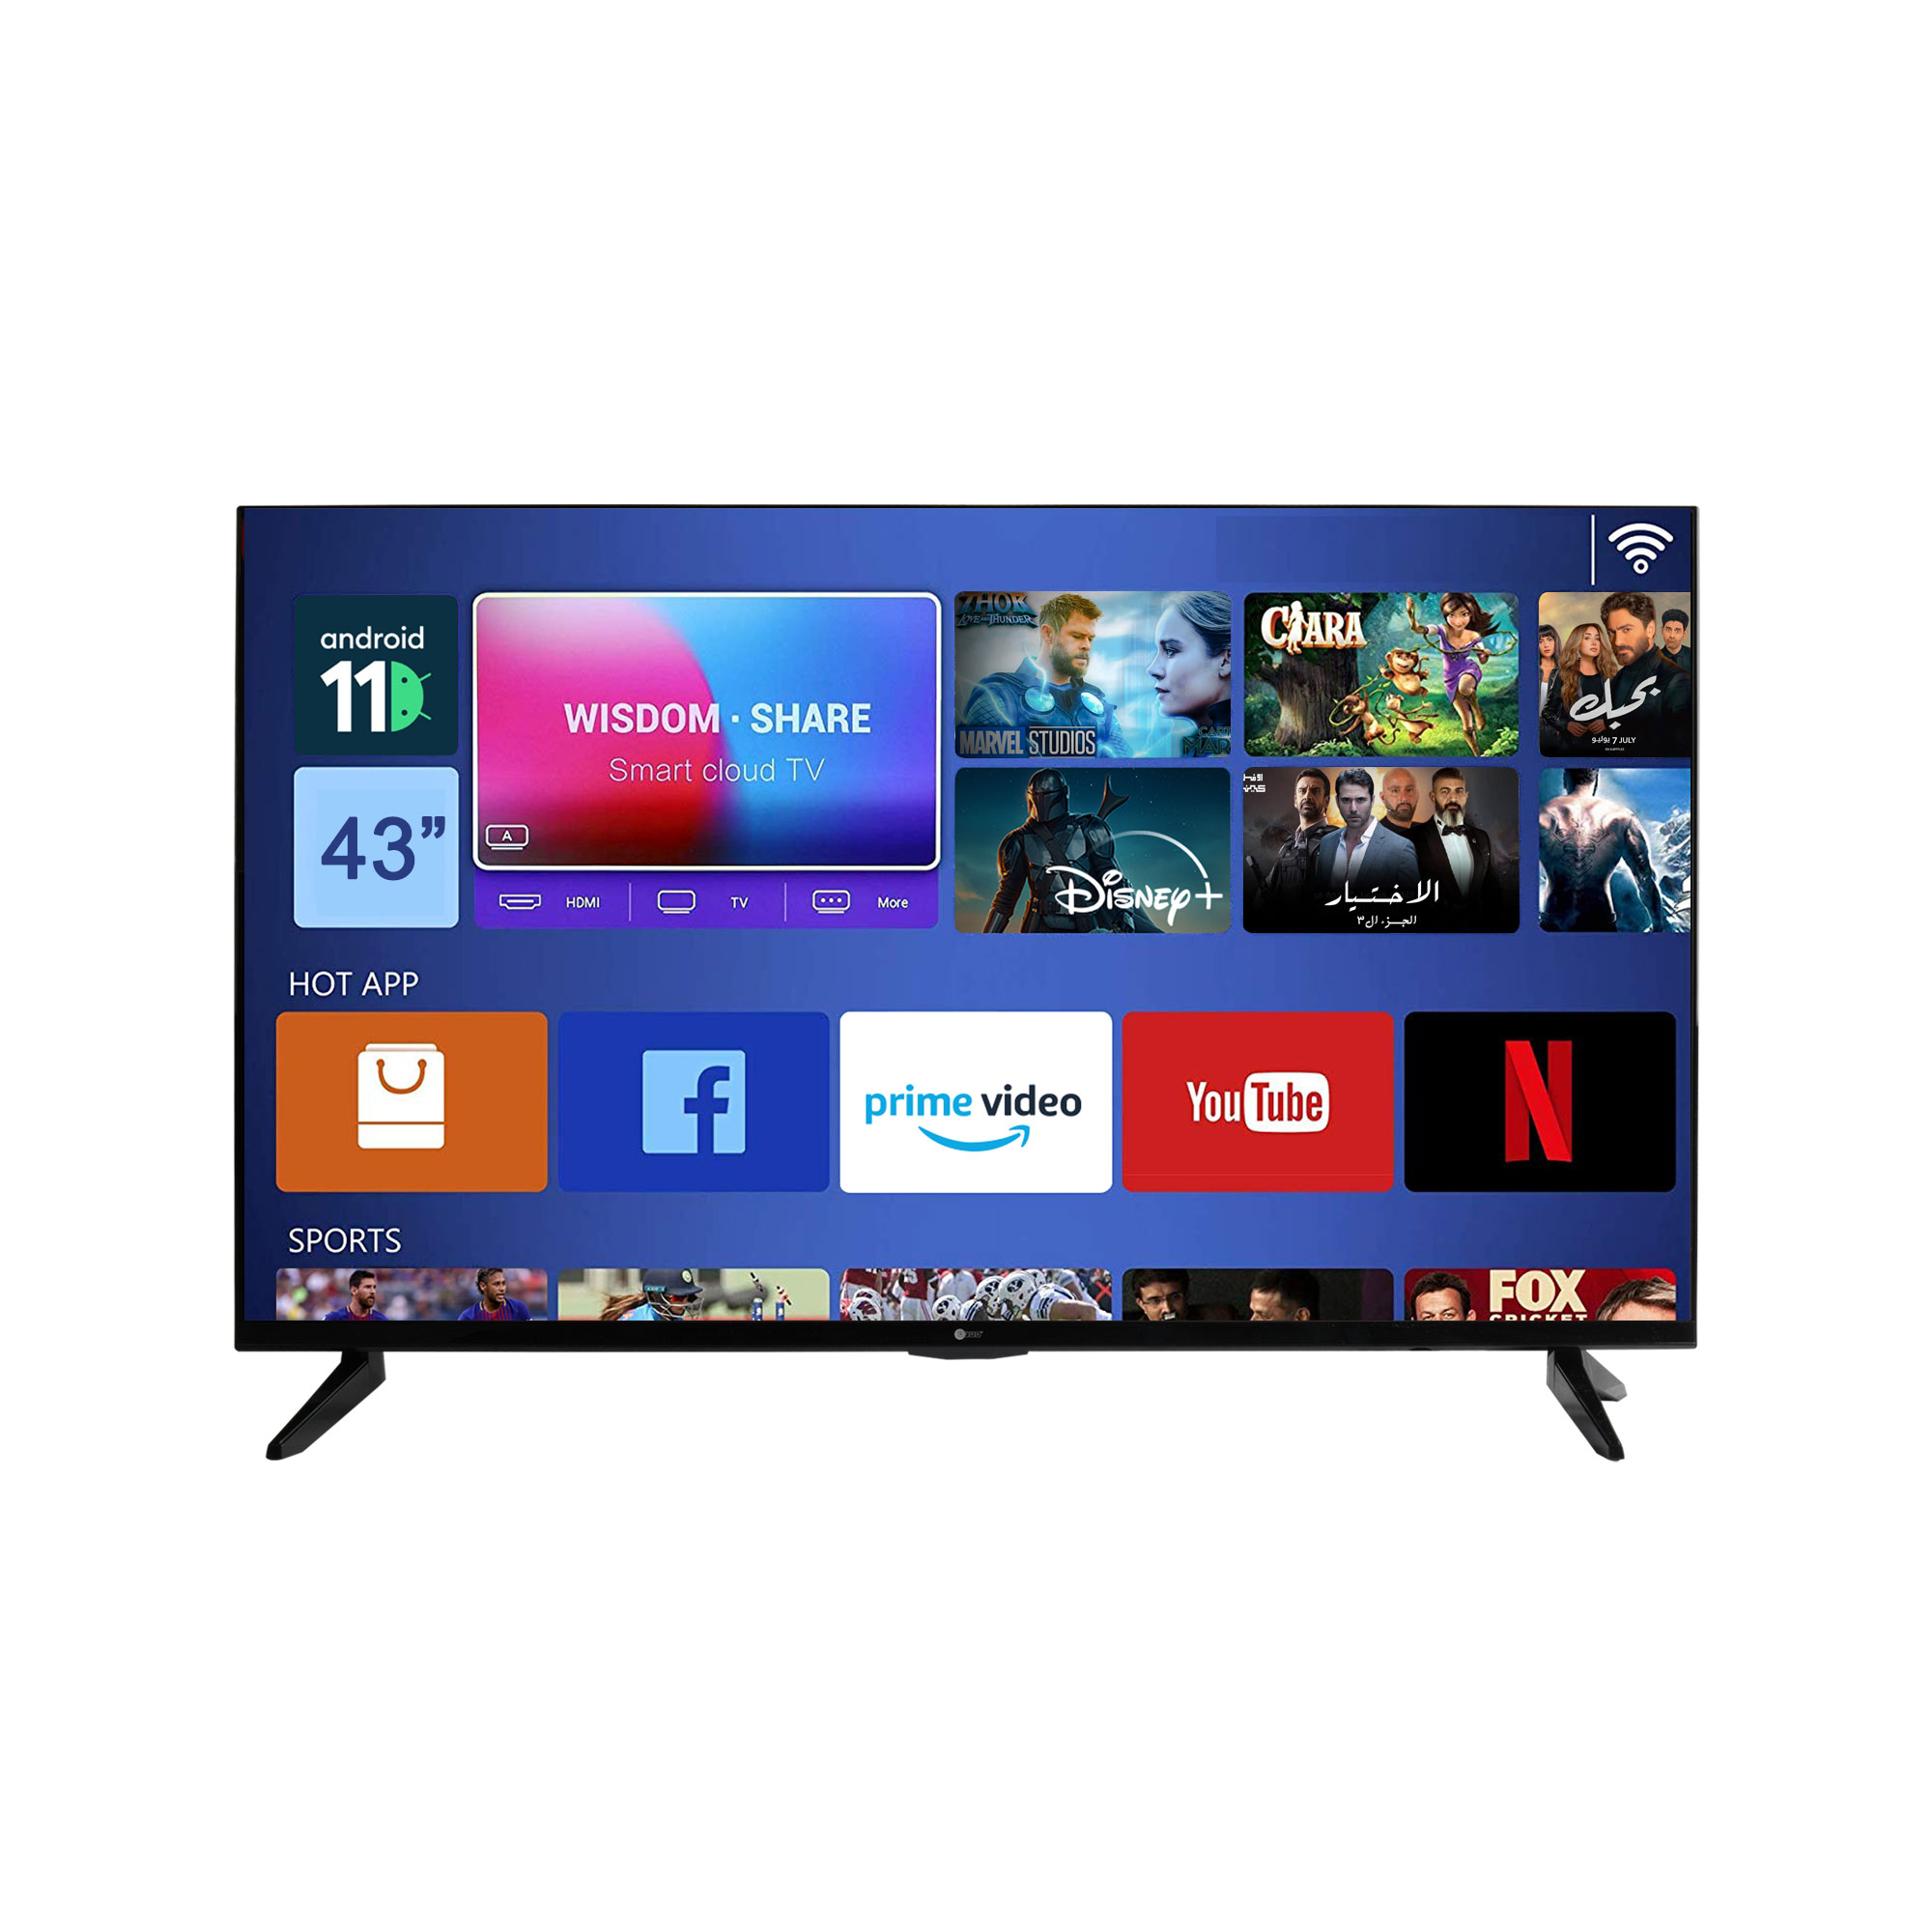 AFRA Smart TV - 43 inch television with Netflix & Youtube